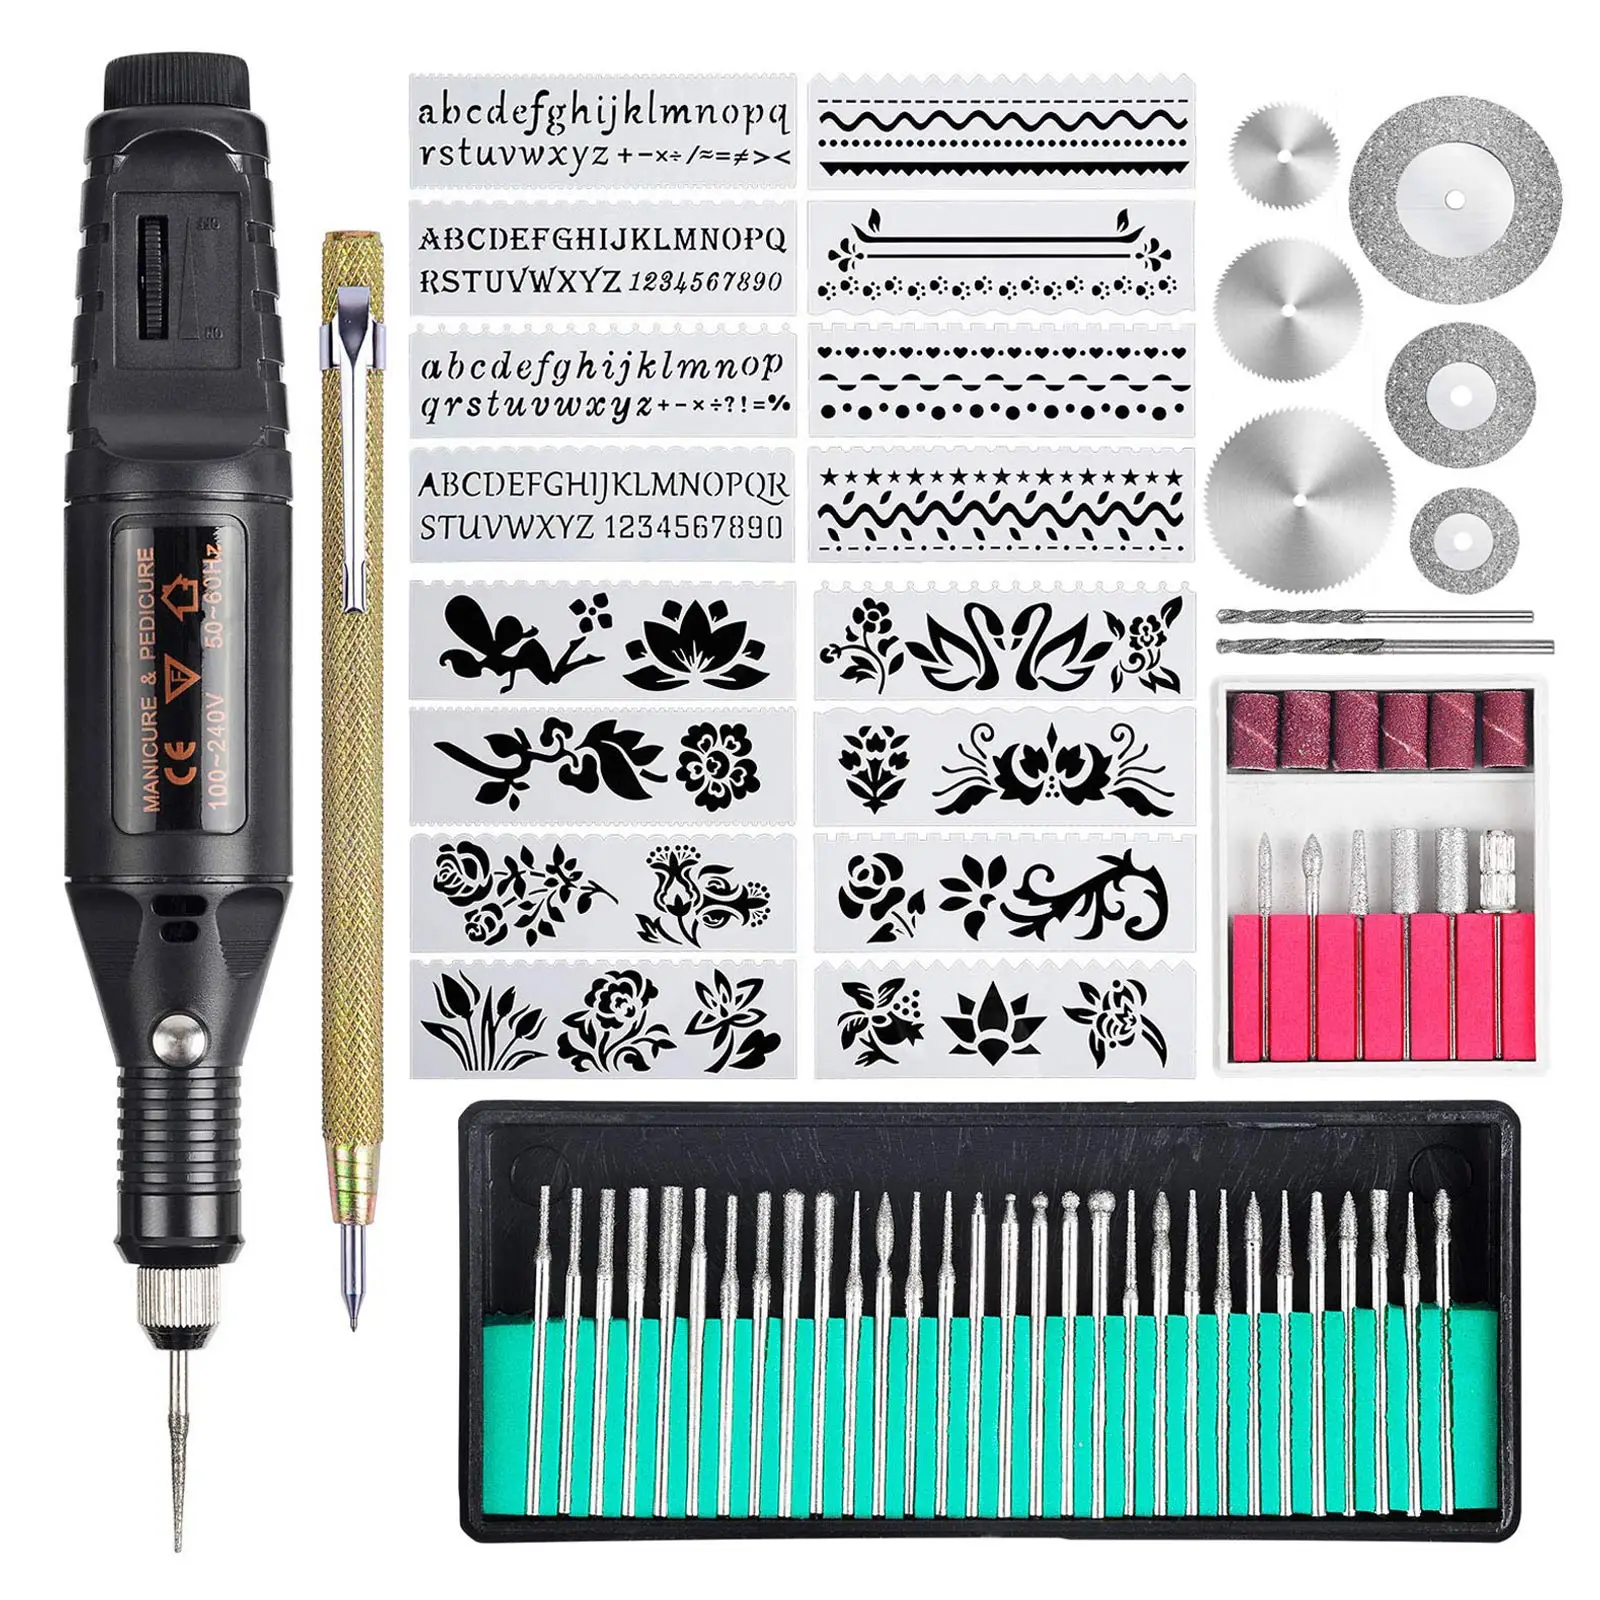 70Pcs Engraving Tool Kit Multifunctional Corded Engraver Pen DIY Rotary Tool for Jewelry Glass Wood Metal Electric Nail Art Dril inse i5 corded handheld vacuum cleaner 18kpa suction 600w motor 1l dust cup for wood floor carpet stair curtain car furniture blue